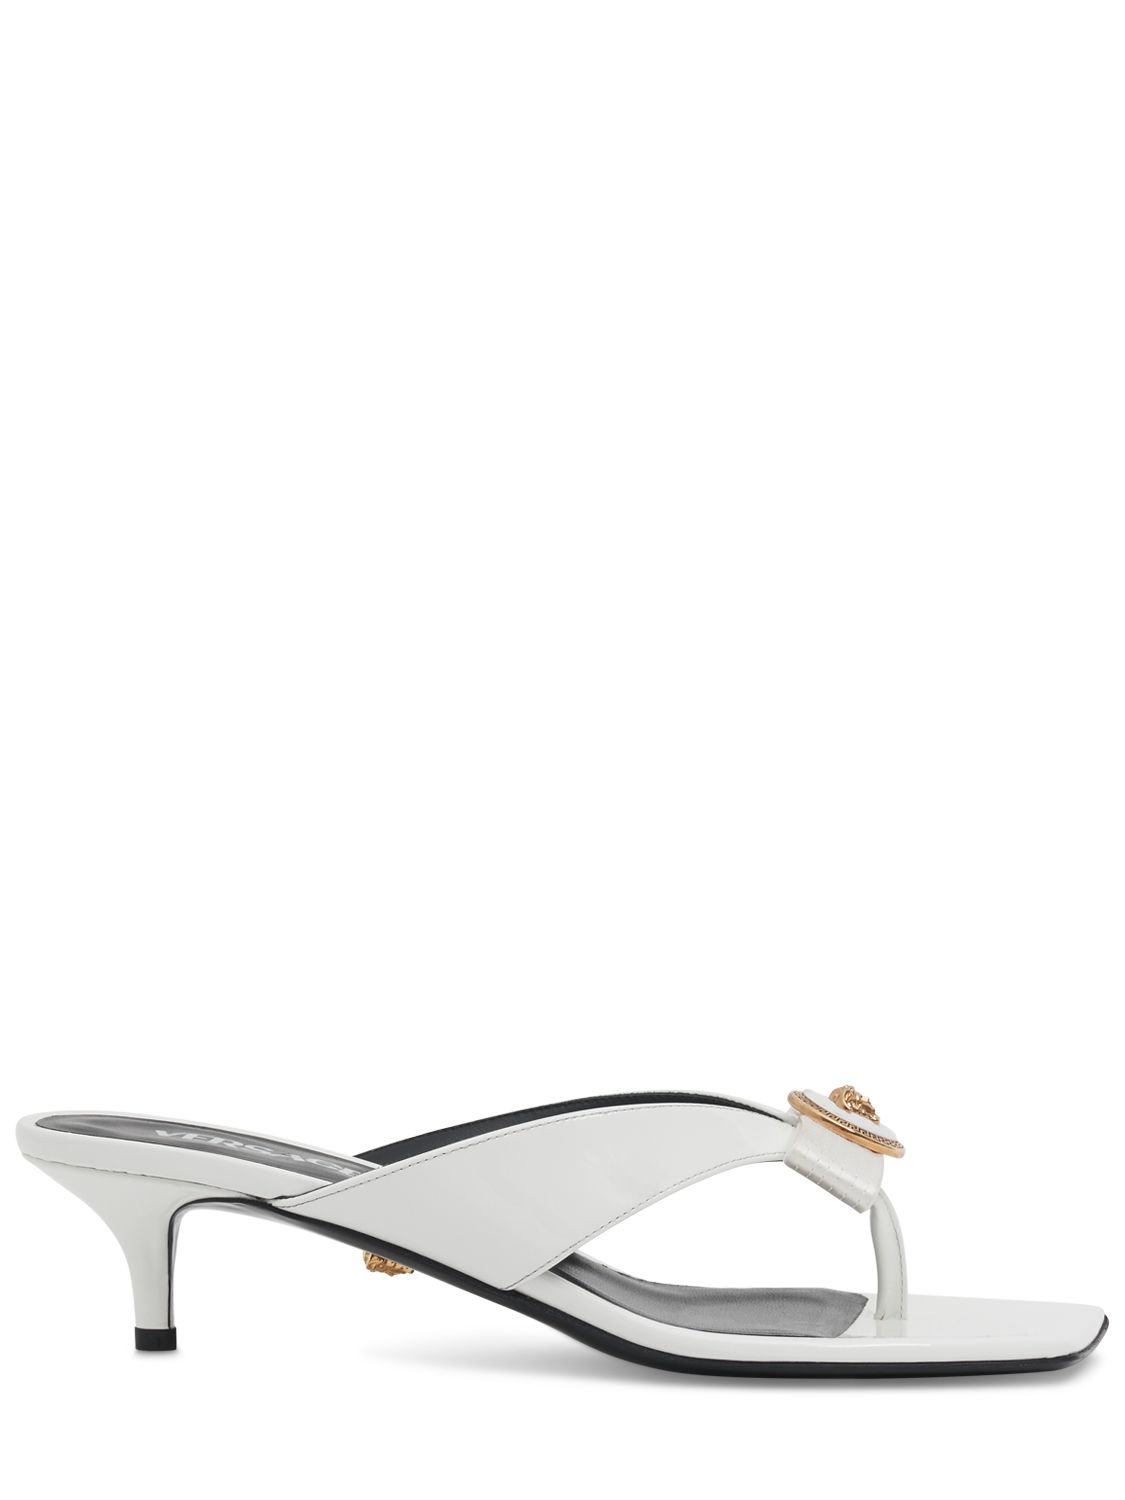 45mm Patent Leather Sandals